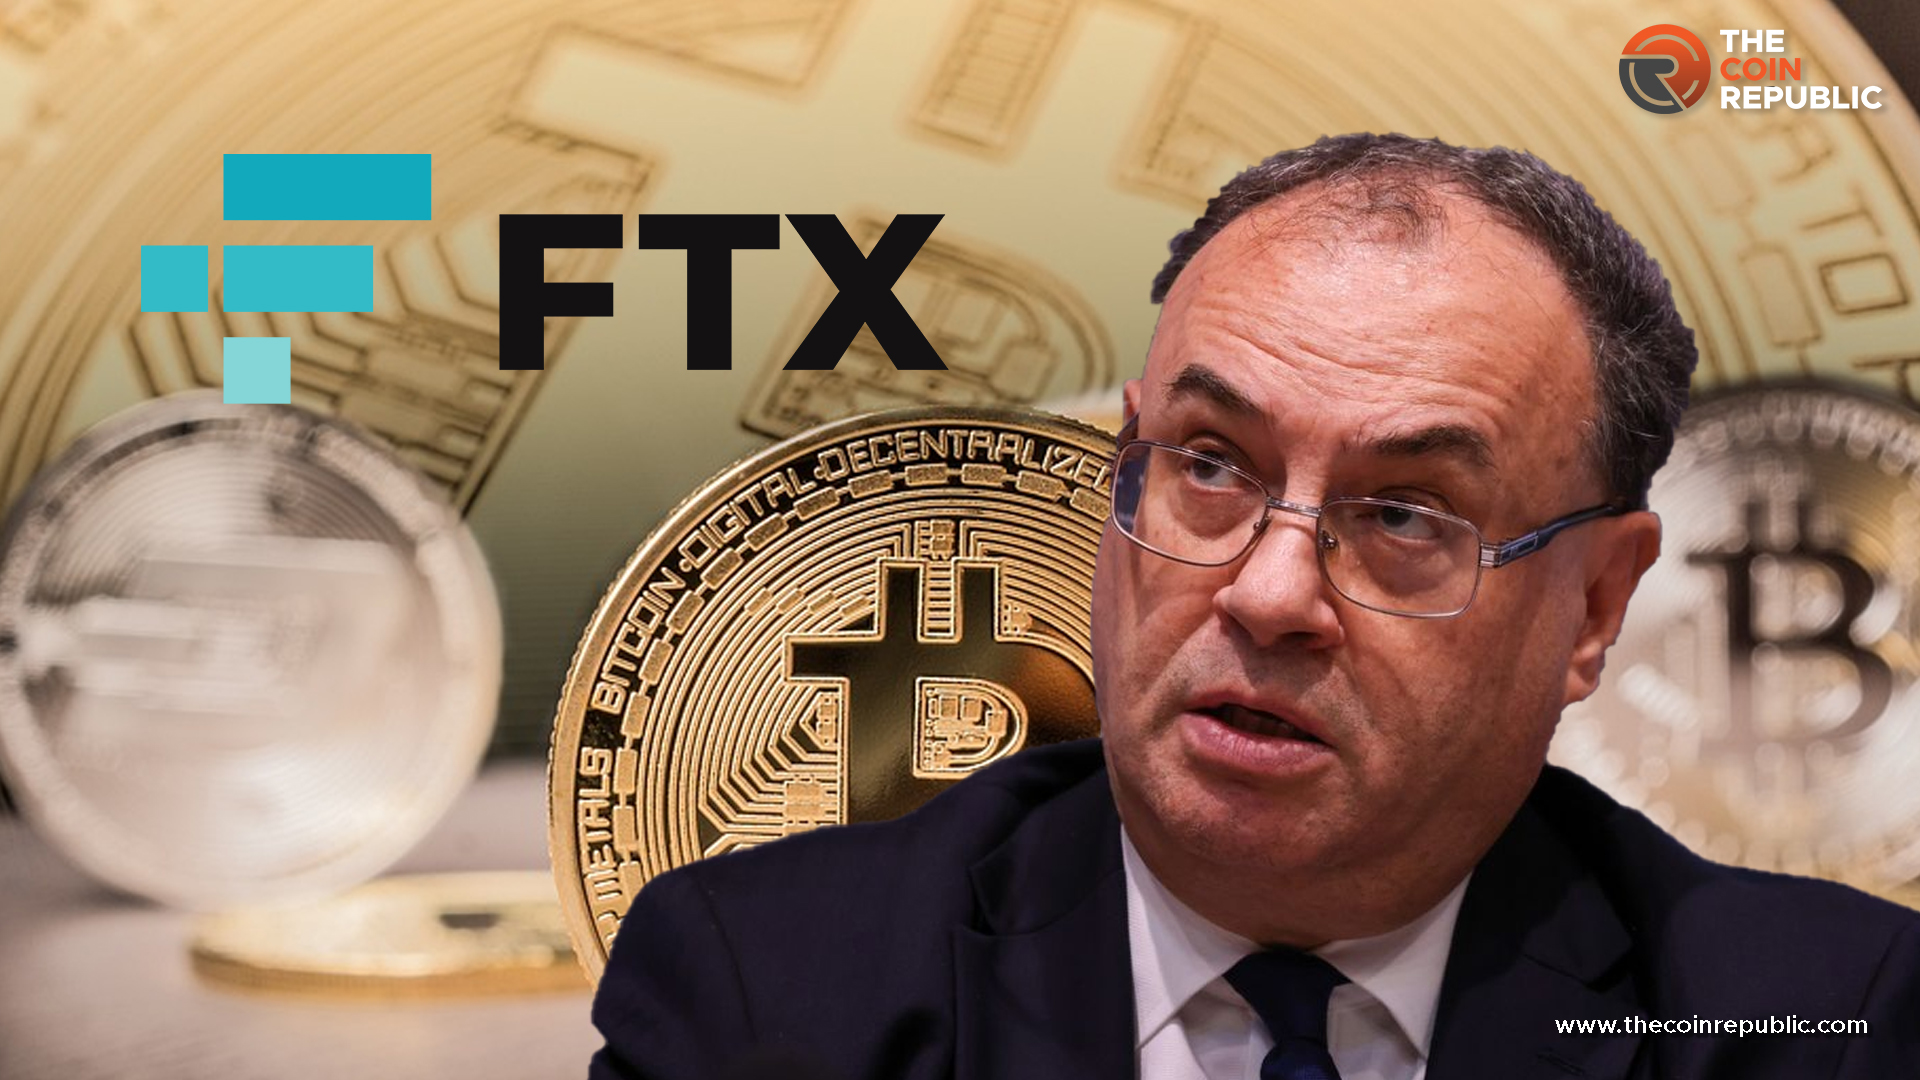 Strict Regulations Needed On Cryptocurrency- BOE Governor